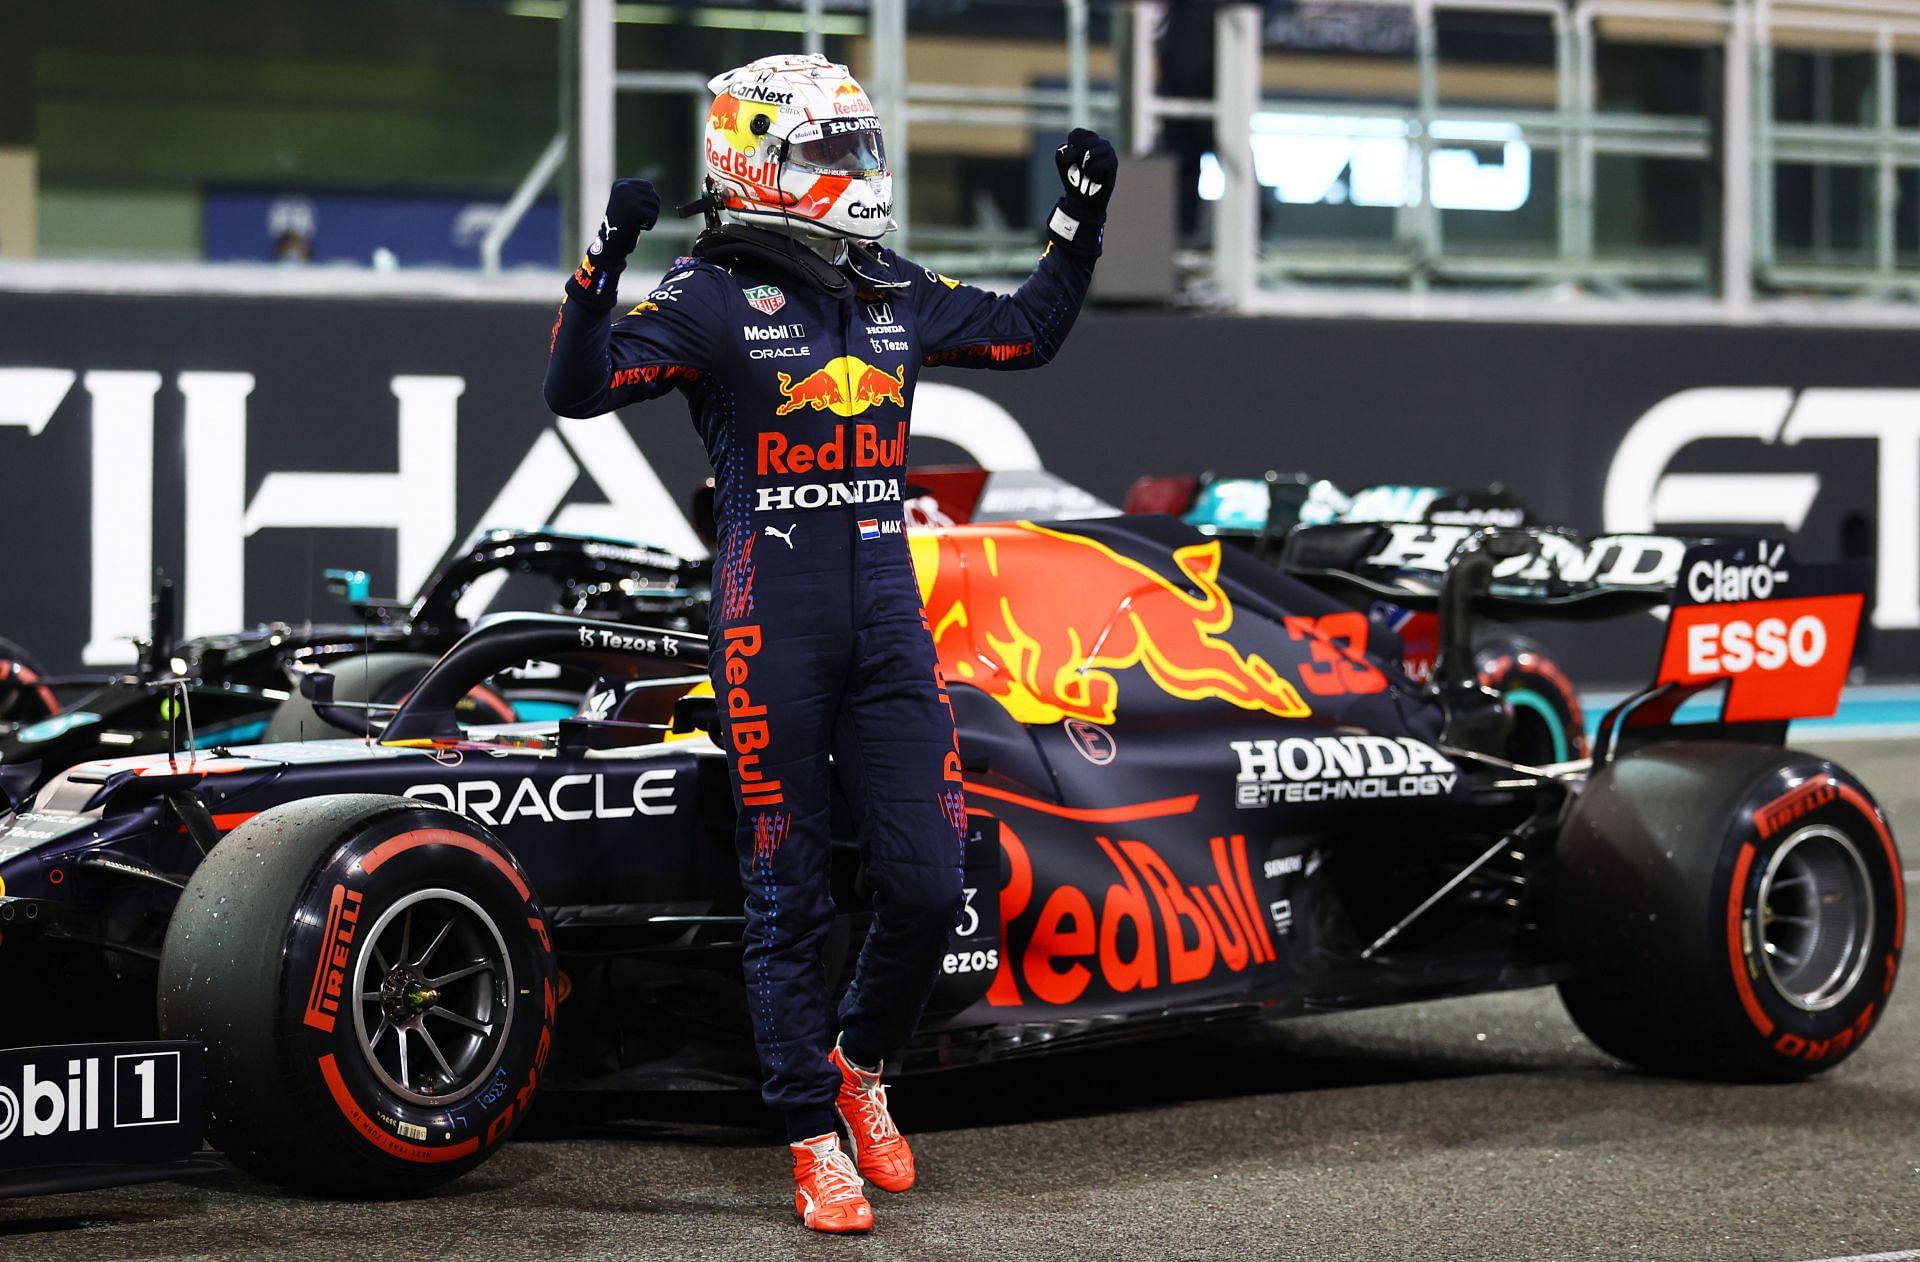 Max Verstappen in parc ferme after clinching the final pole position of the 2021 F1 season in Abu Dhabi.